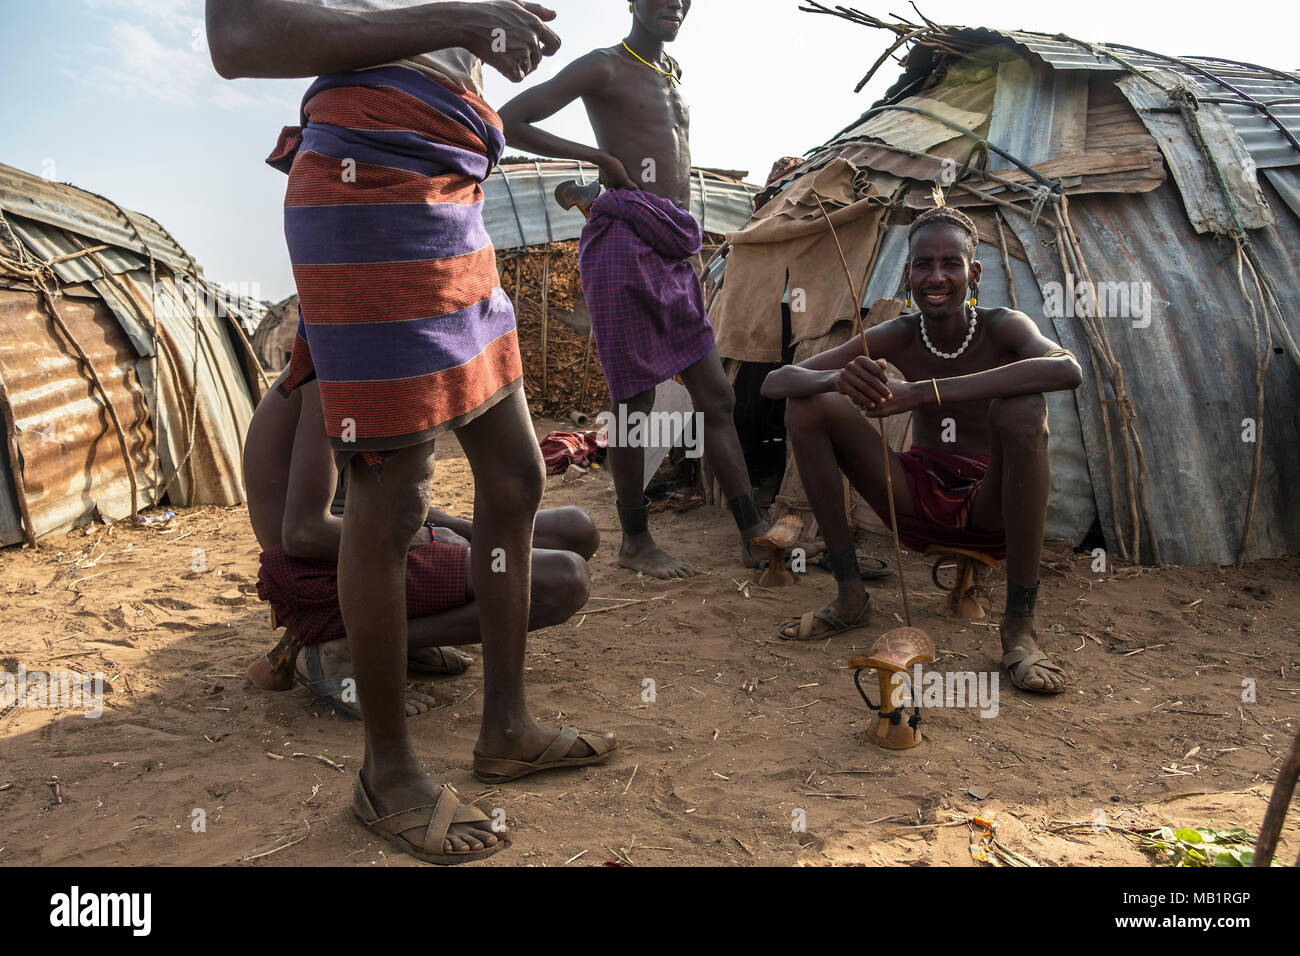 Omorate, Ethiopia - January 25, 2018: Unidentified men from the Dassanech tribe making chairs in their village in Omorate, Ethiopia. Stock Photo